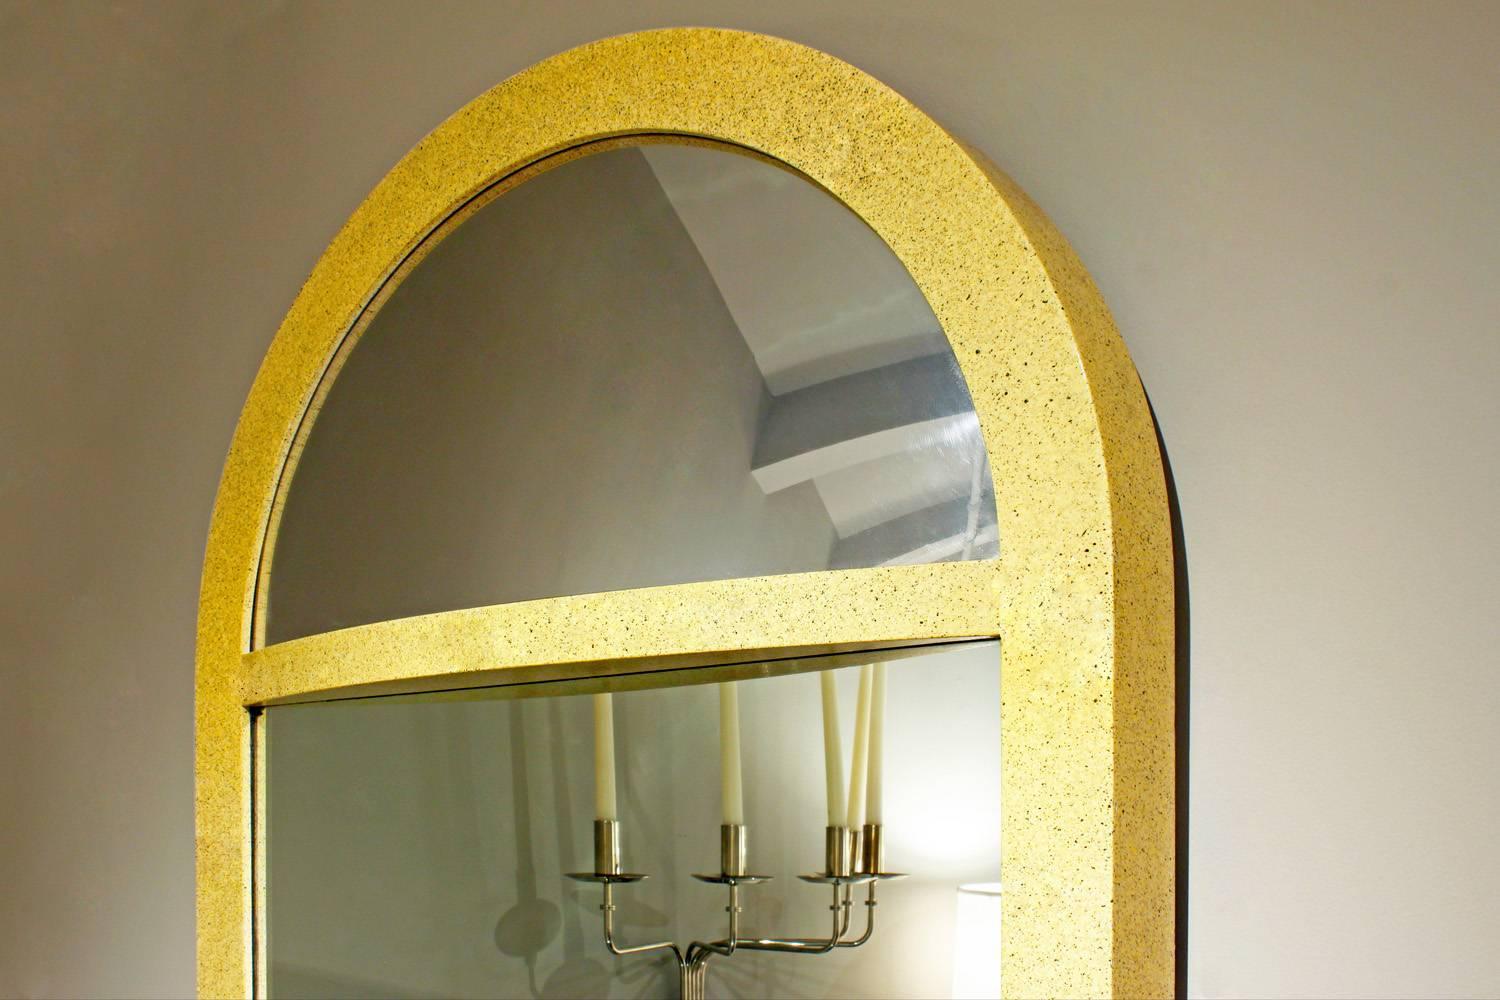 Pair of large wall hanging mirrors with custom speckled lacquer and convex mirrors on top by Karl Springer, American, 1970s.